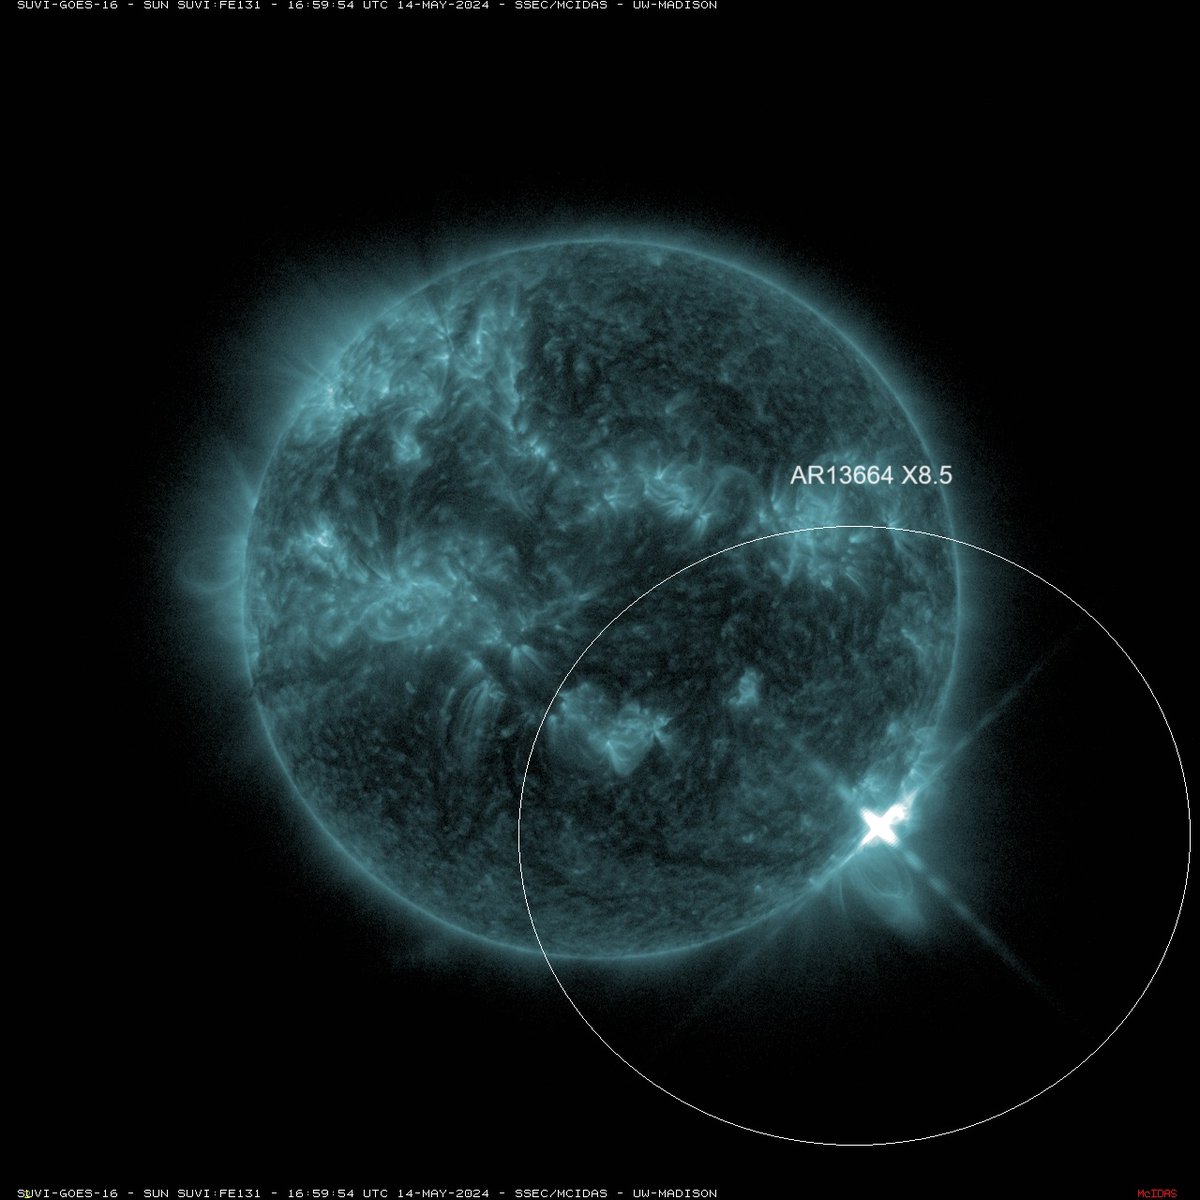 AR13664 finally delivers an X8.5 solar flare behind the limb with any associated CME well out of the Earth Sun line.  This is the largest solar flare of the current solar cycle.  #Xclass #Spaceweather